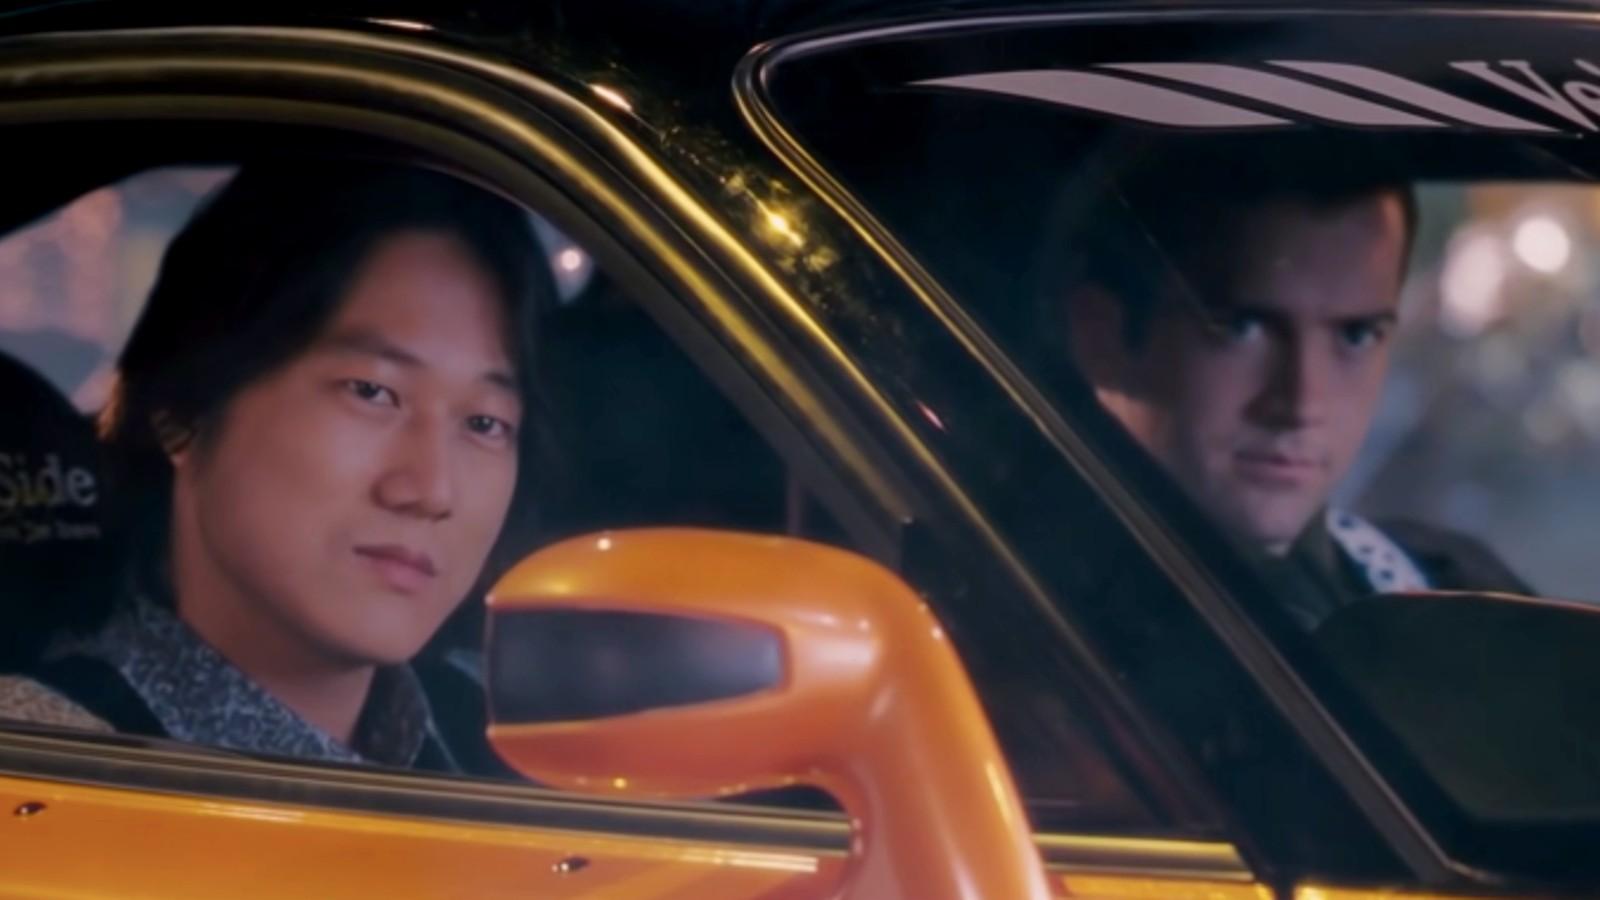 Races are the stars of 'Tokyo Drift